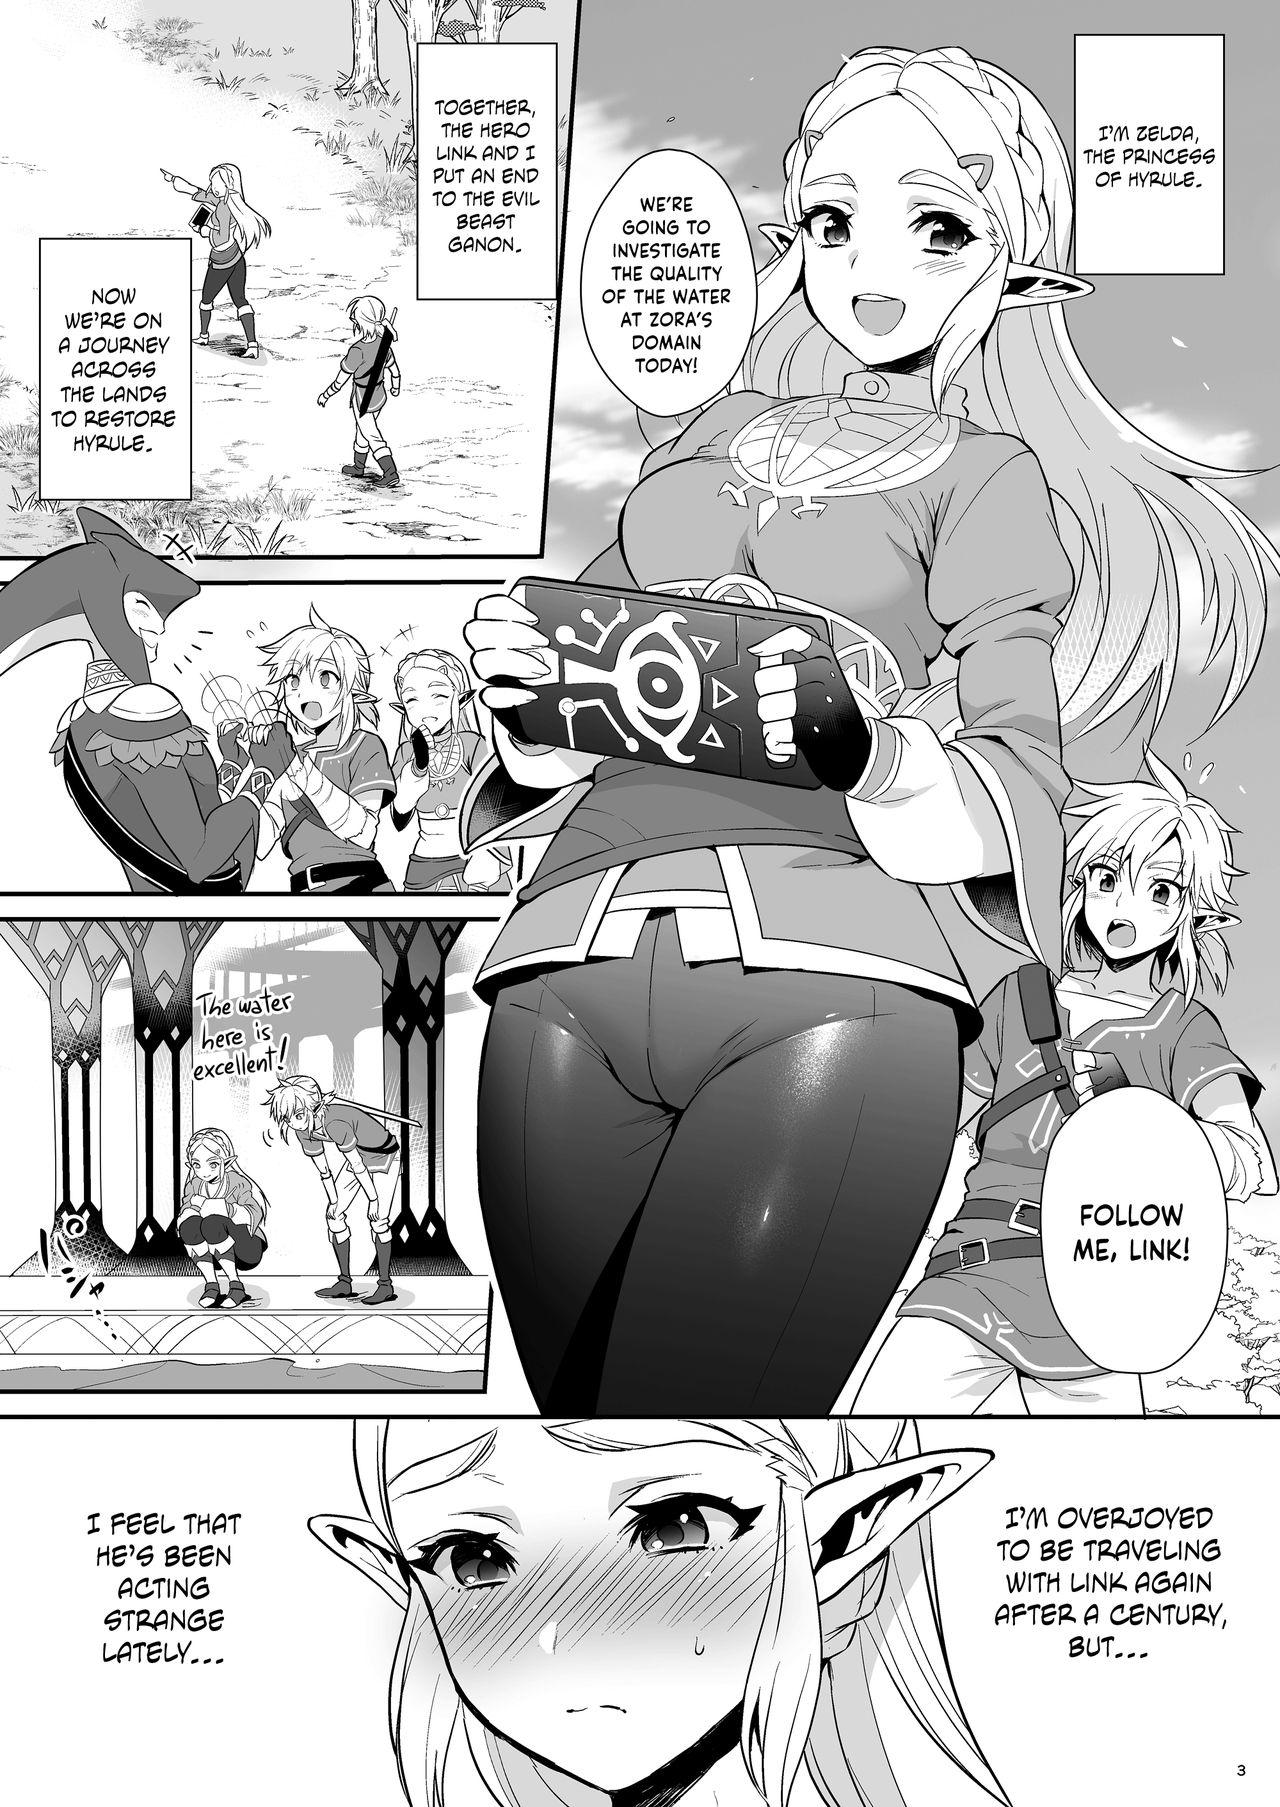 Homosexual Hyrule Hanei no Tame no Katsudou! | Taking Steps to Ensure Hyrule's Prosperity! - The legend of zelda Small Tits Porn - Page 4